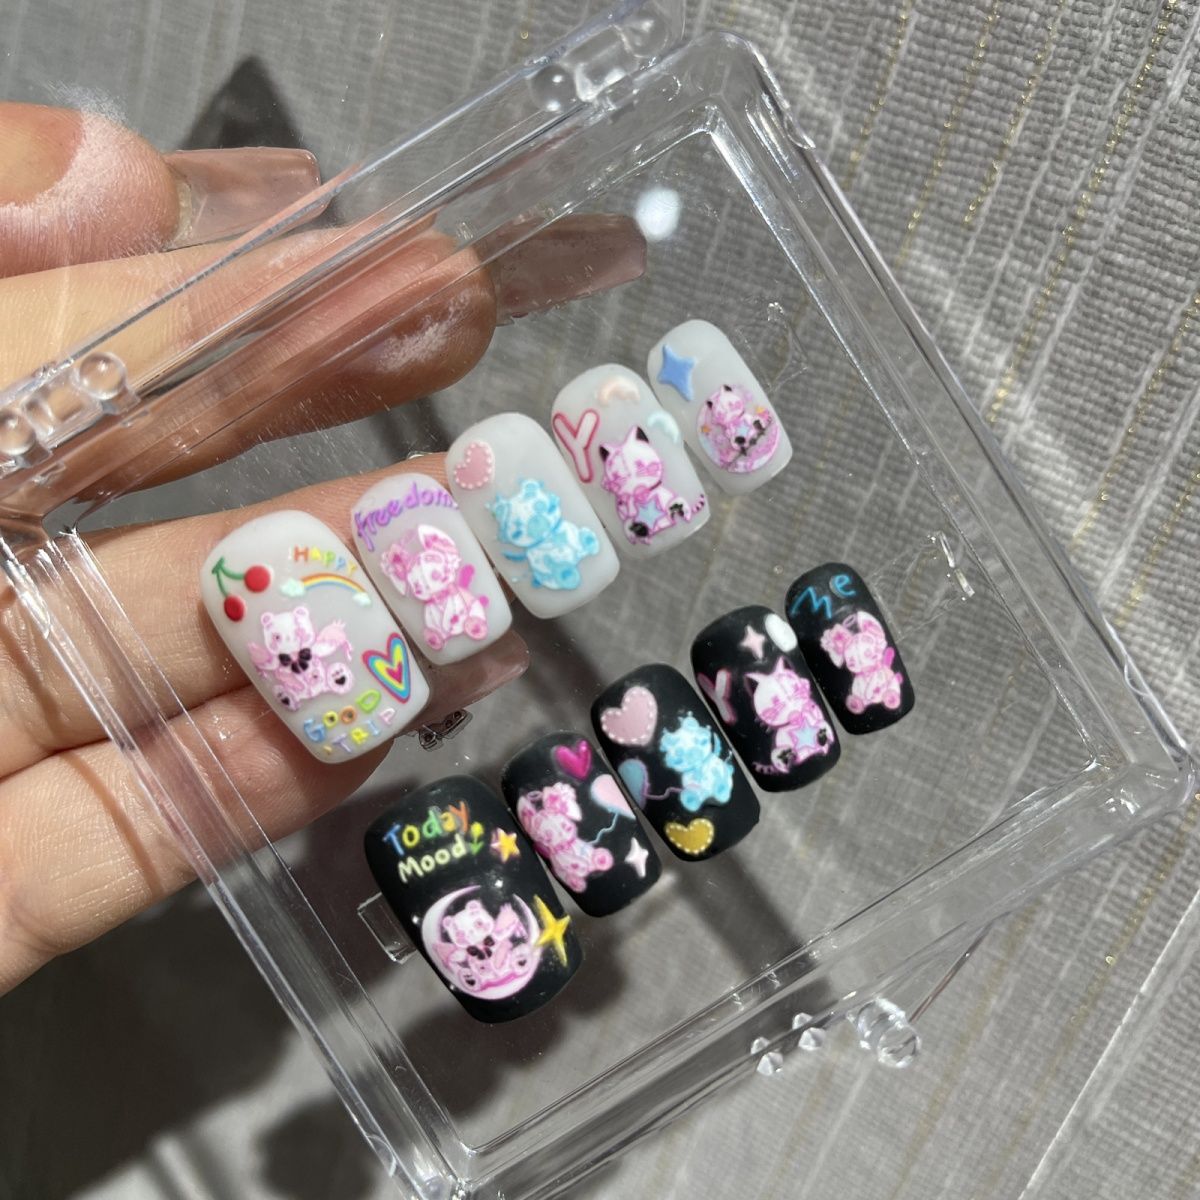 FAIRY TALE-TEN PIECES OF HANDCRAFTED PRESS ON NAIL